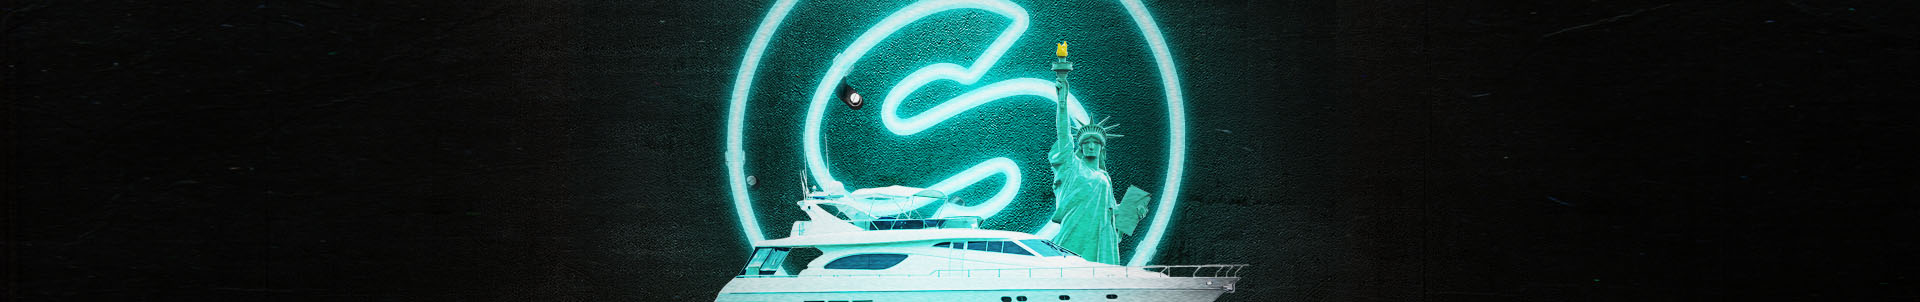 Spinnin' Sessions goes New York with an amazing yacht cruise!